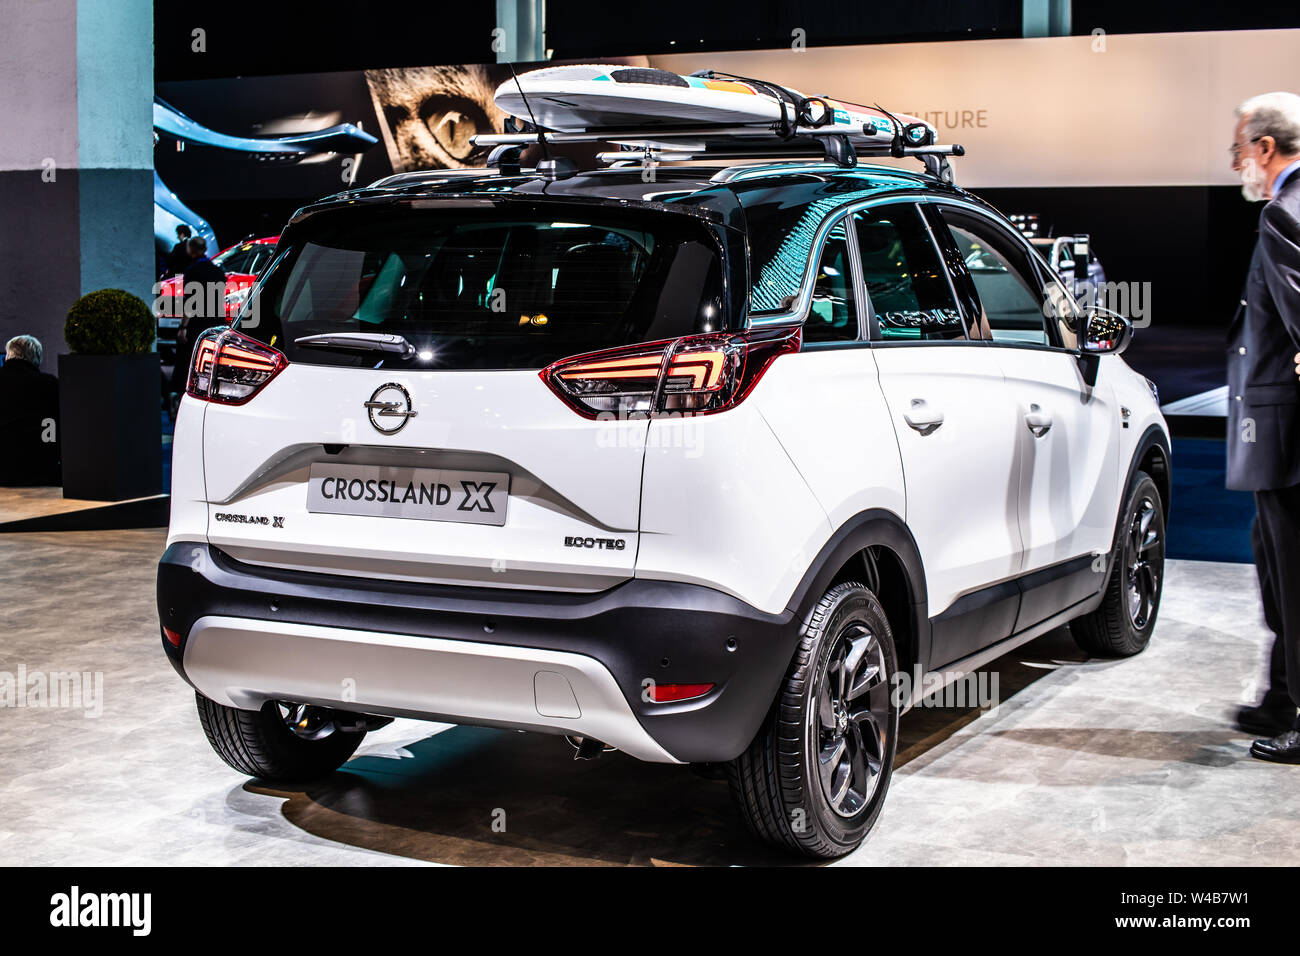 https://c8.alamy.com/comp/W4B7W1/brussels-belgium-jan-2019-metallic-white-opel-crossland-x-at-brussels-motor-show-subcompact-crossover-suv-produced-by-opel-psa-group-W4B7W1.jpg